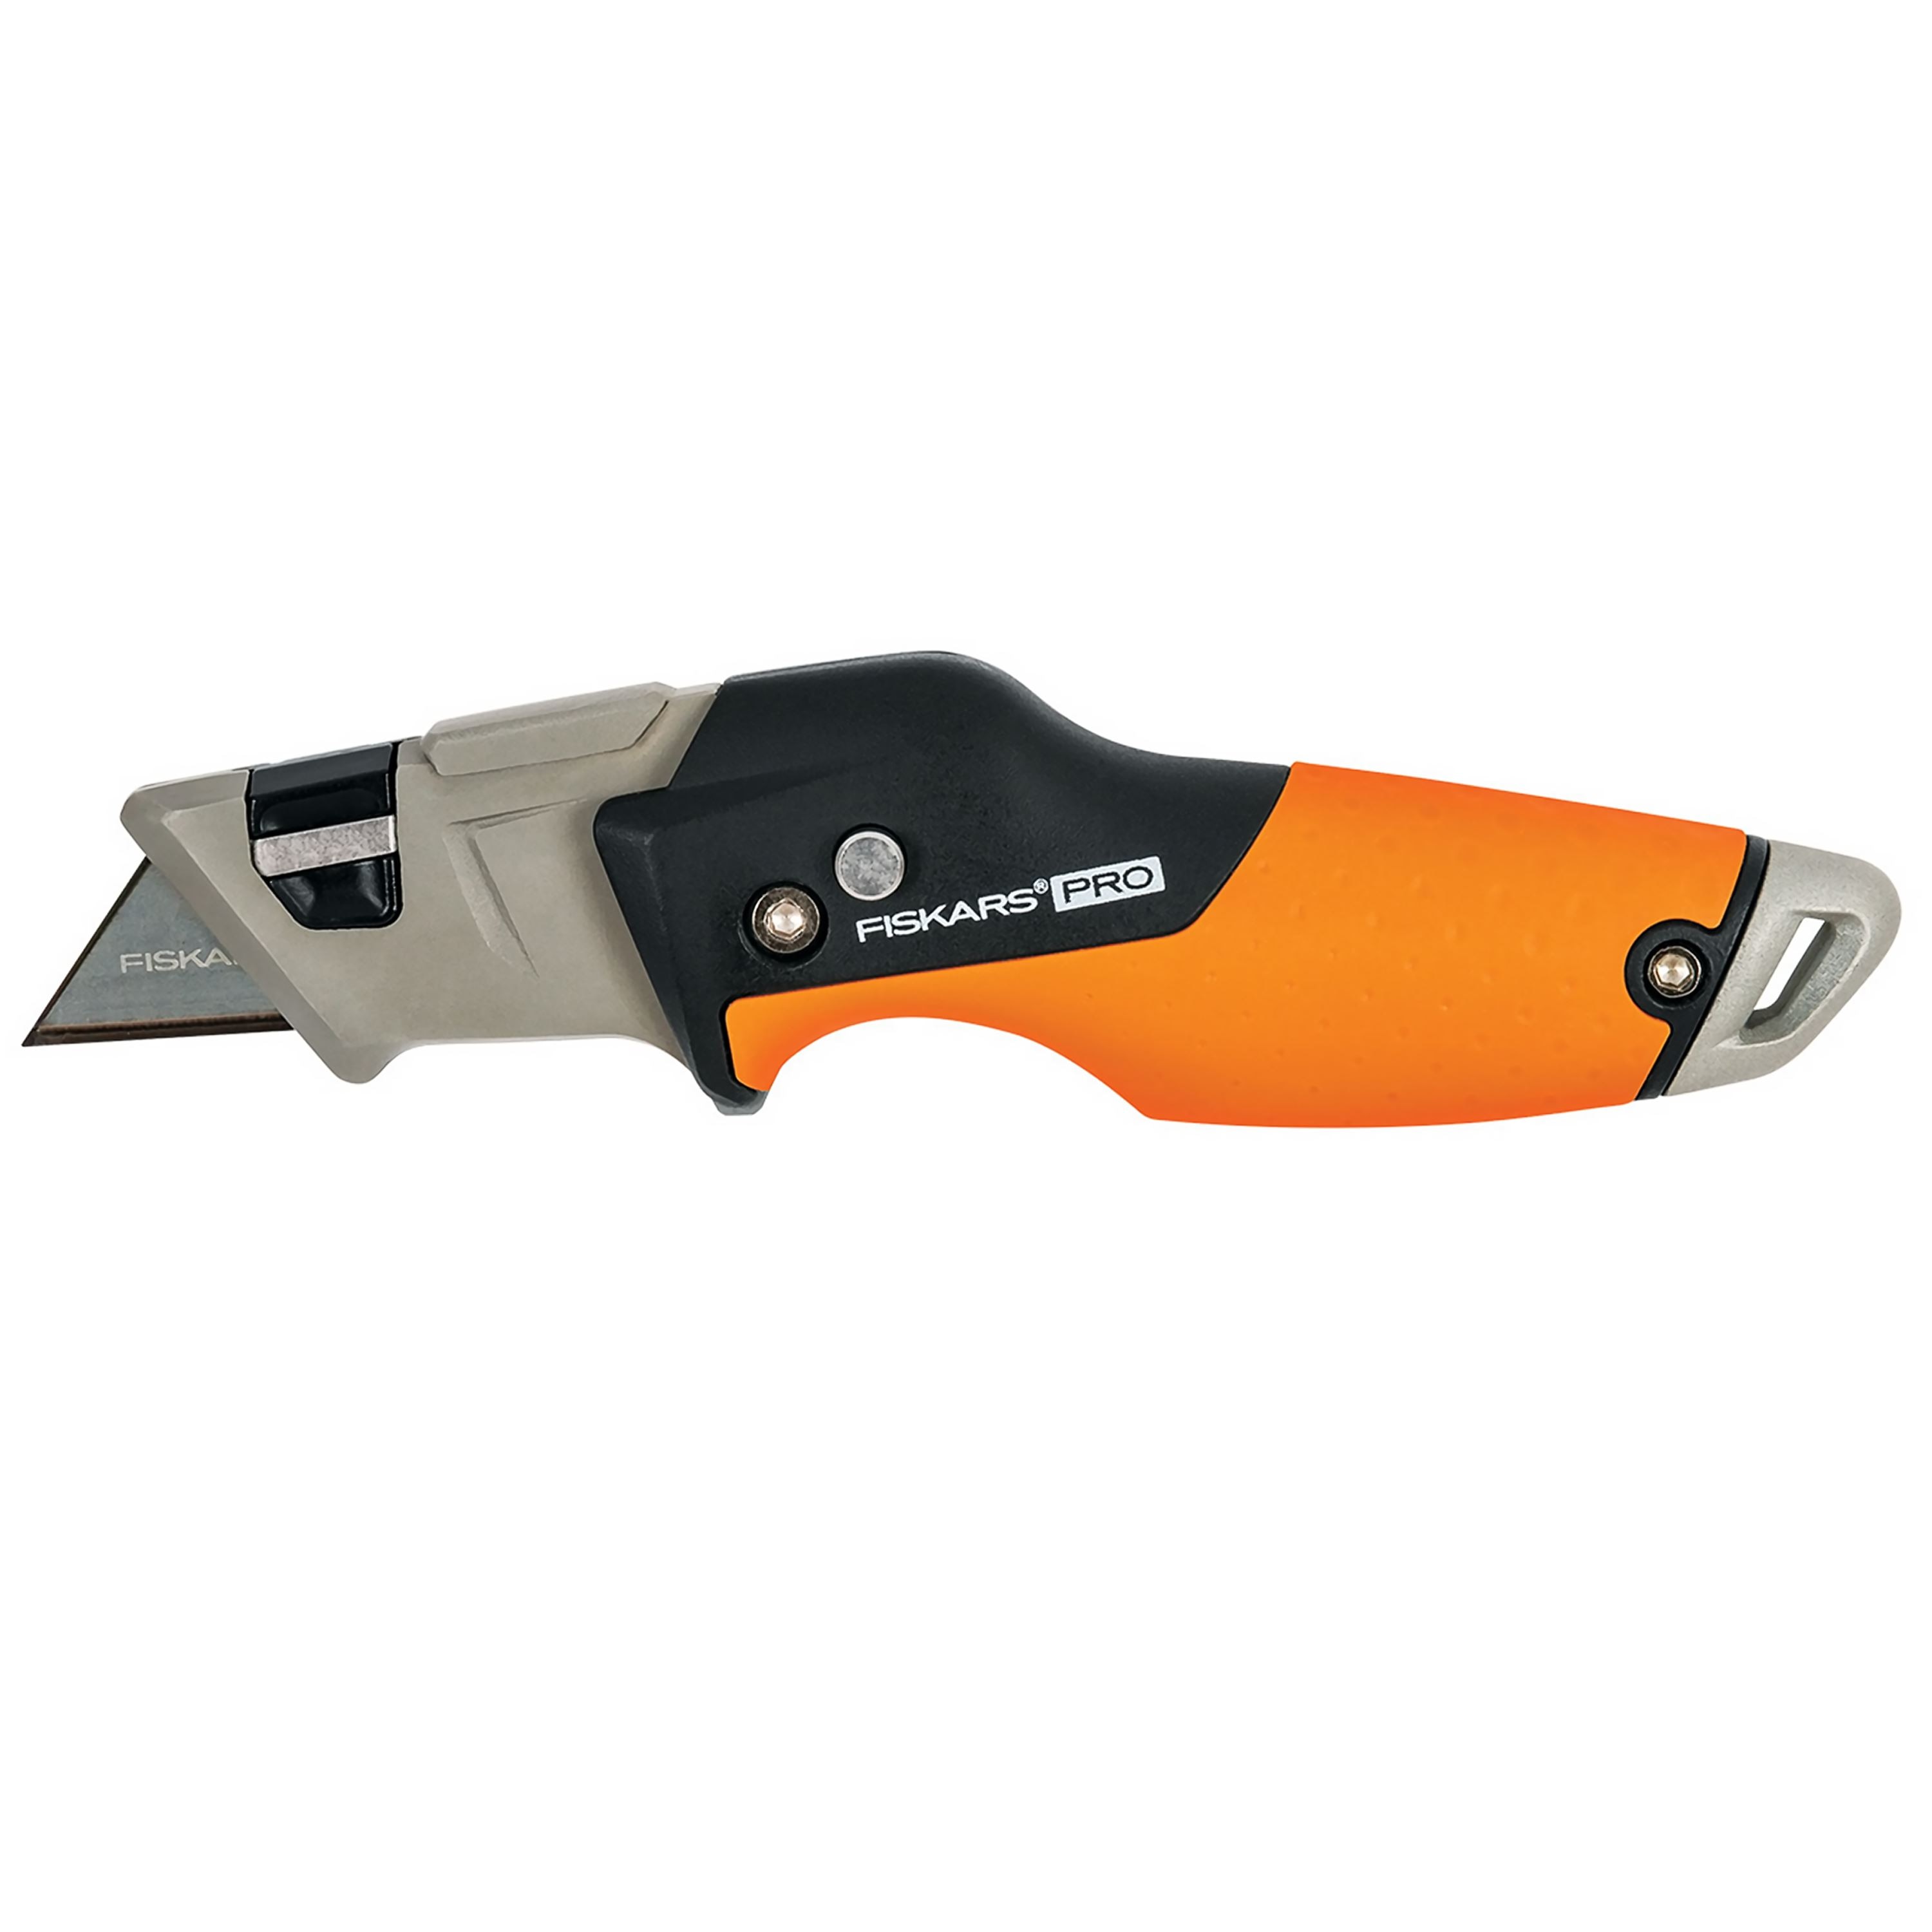 Kraft Tool Co- Professional Utility Knife with Retractable Blade